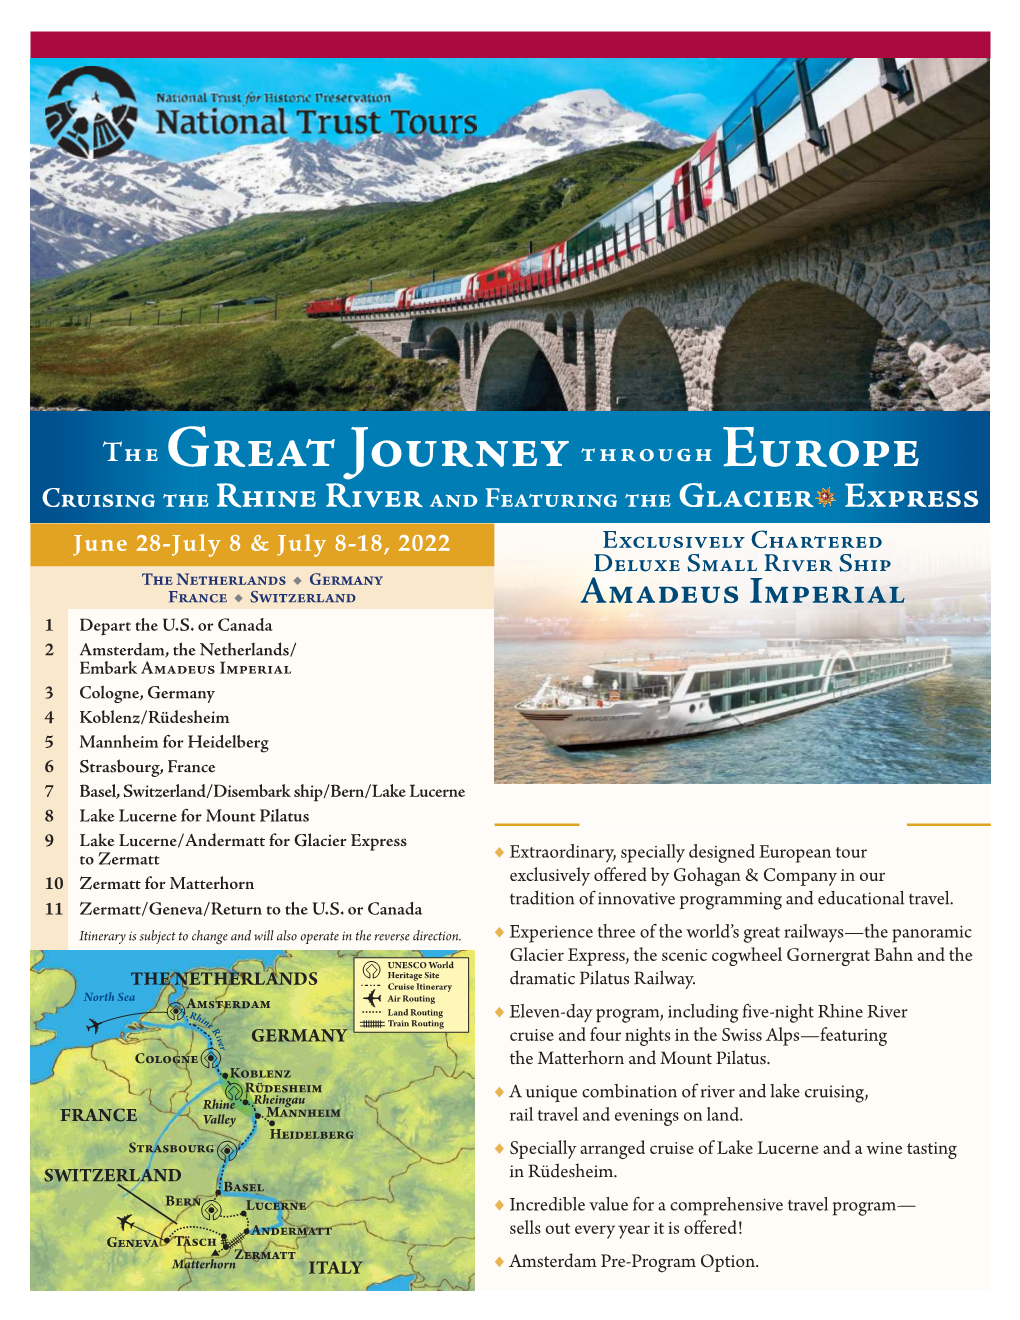 The Great Journeythrough Europe